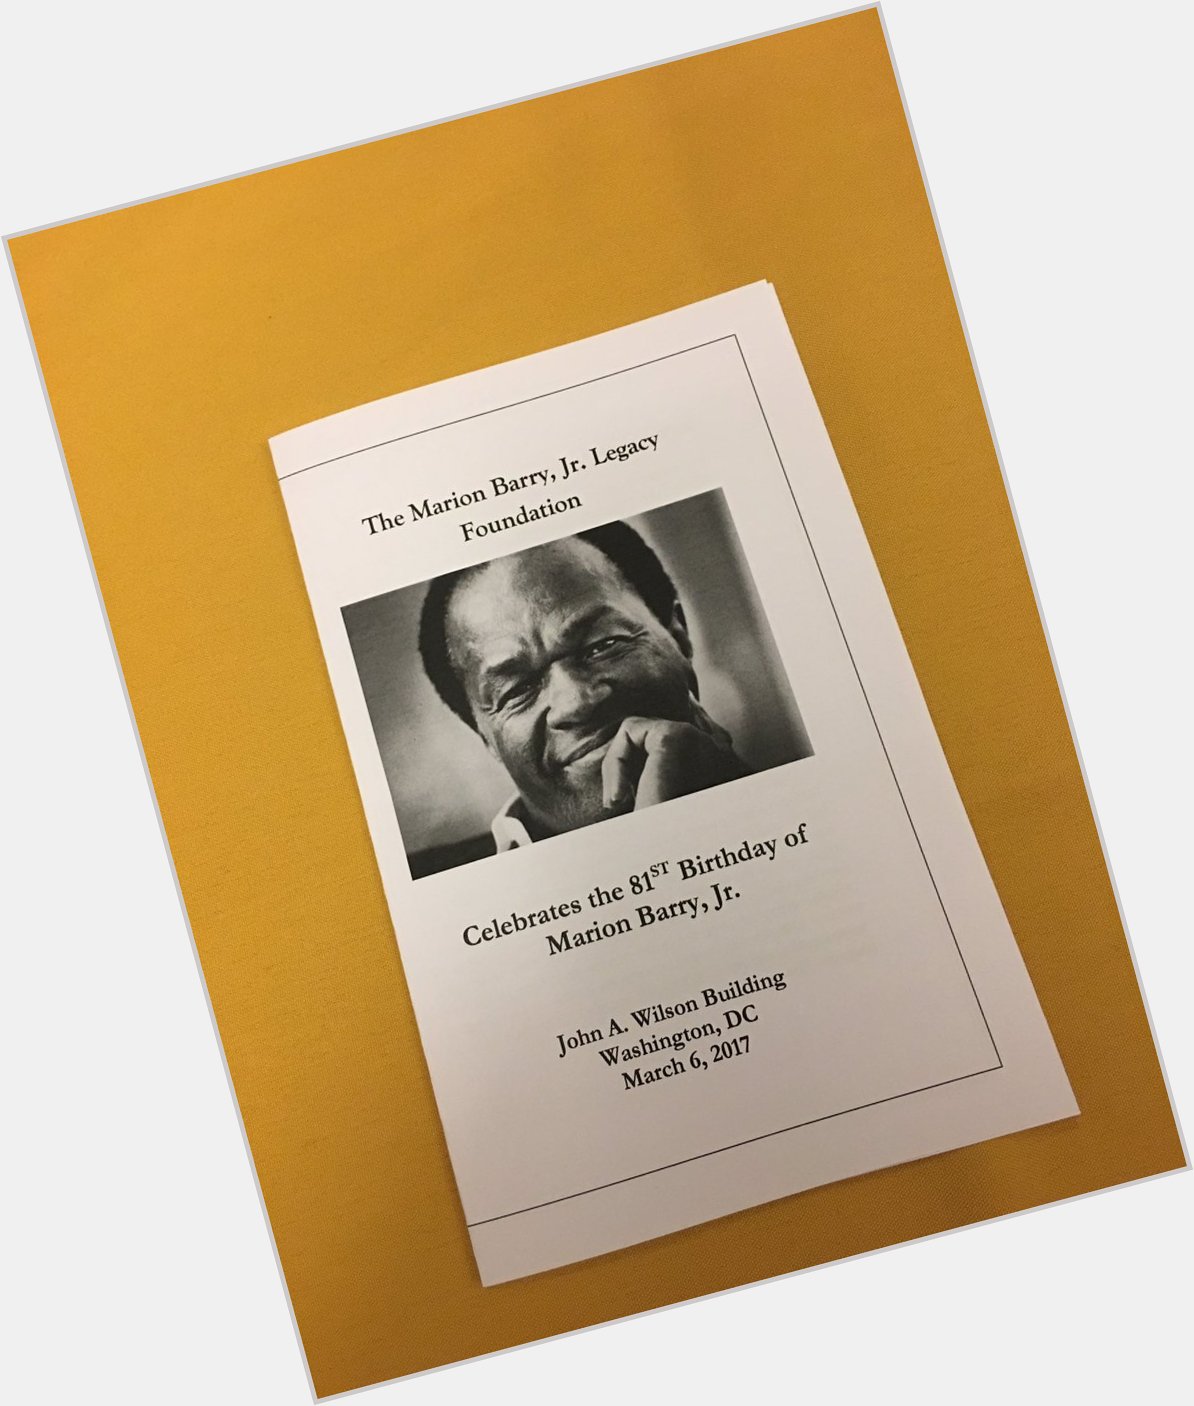 Happy 81st Birthday Mayor for Life-Marion Barry, Jr. 